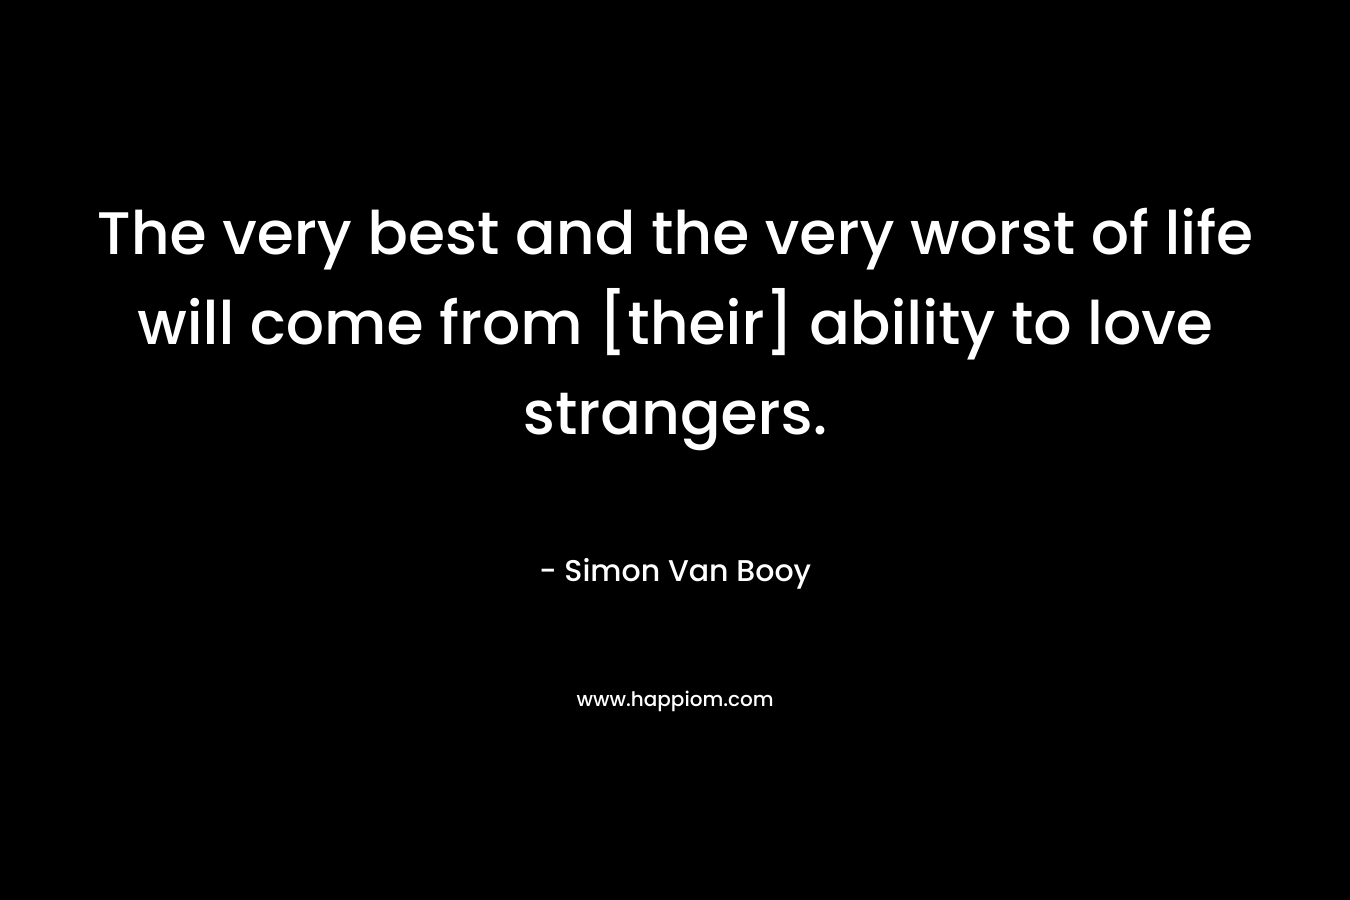 The very best and the very worst of life will come from [their] ability to love strangers. – Simon Van Booy